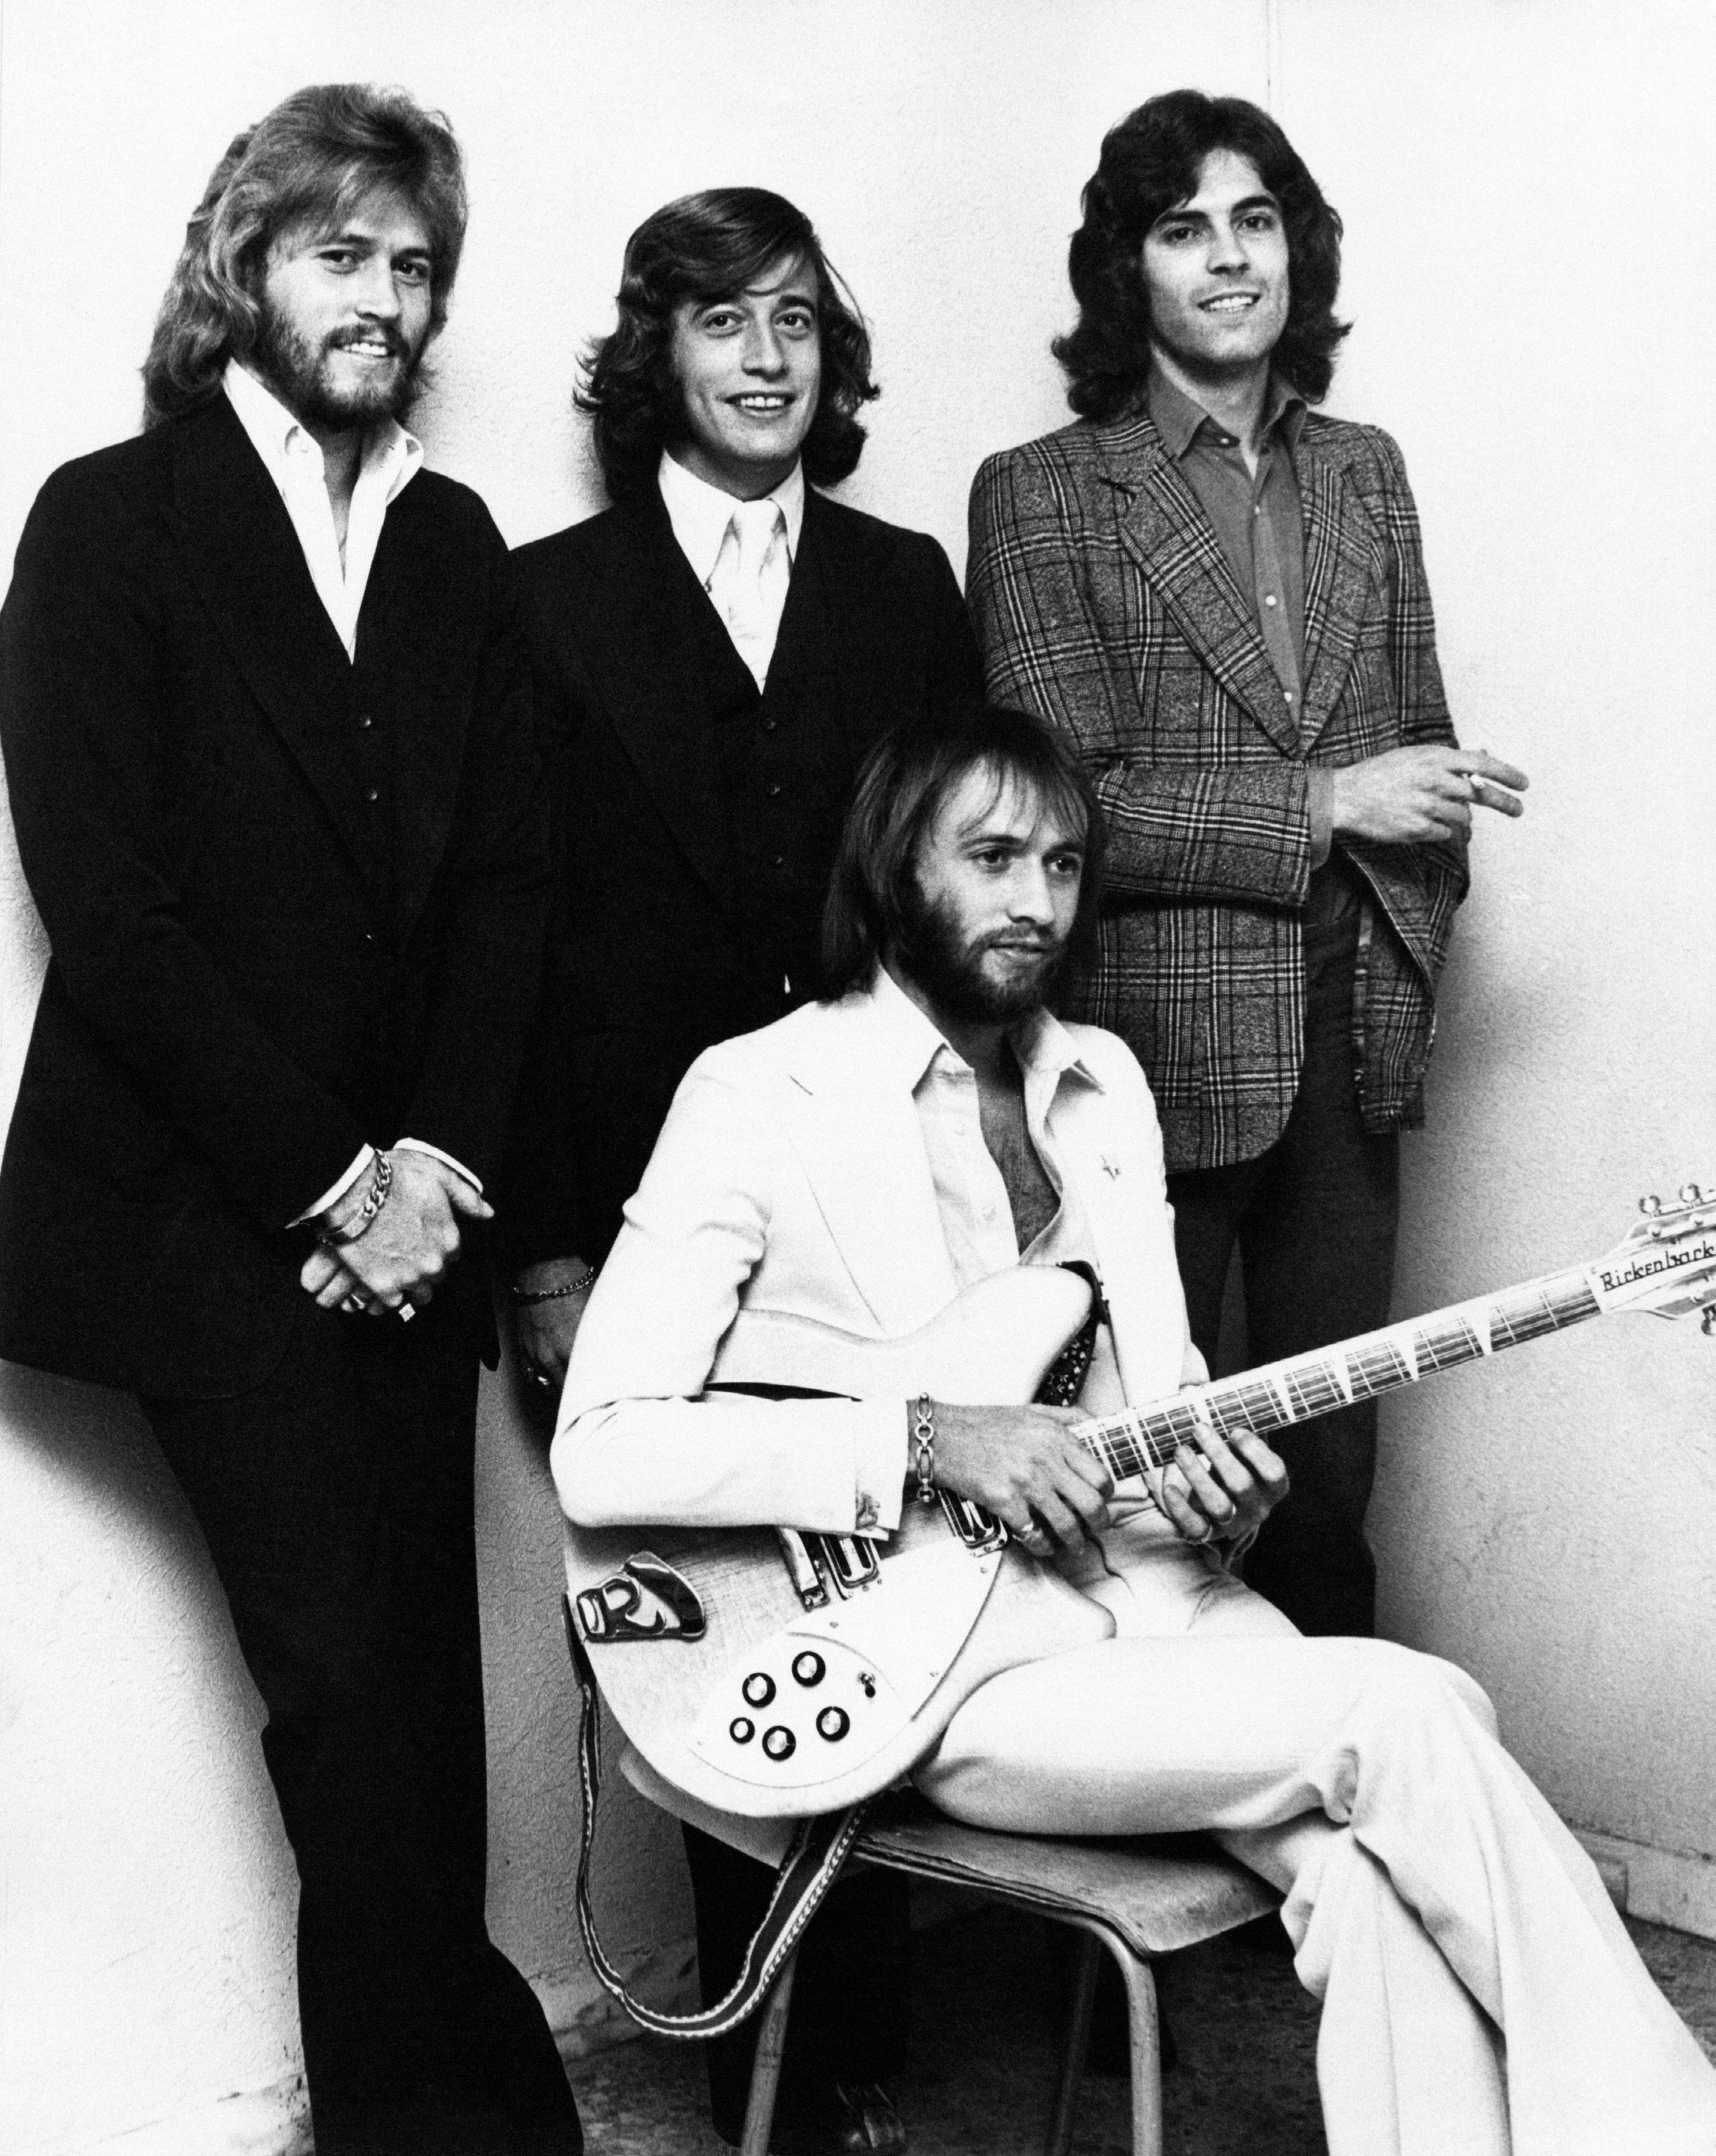 Portrait of the band Bee Gees formed by British-born Australian singers, musicians and composers, the brothers Barry, Robin, Maurice and Andy Gibb. Rome, 1972 | Source: Getty Images